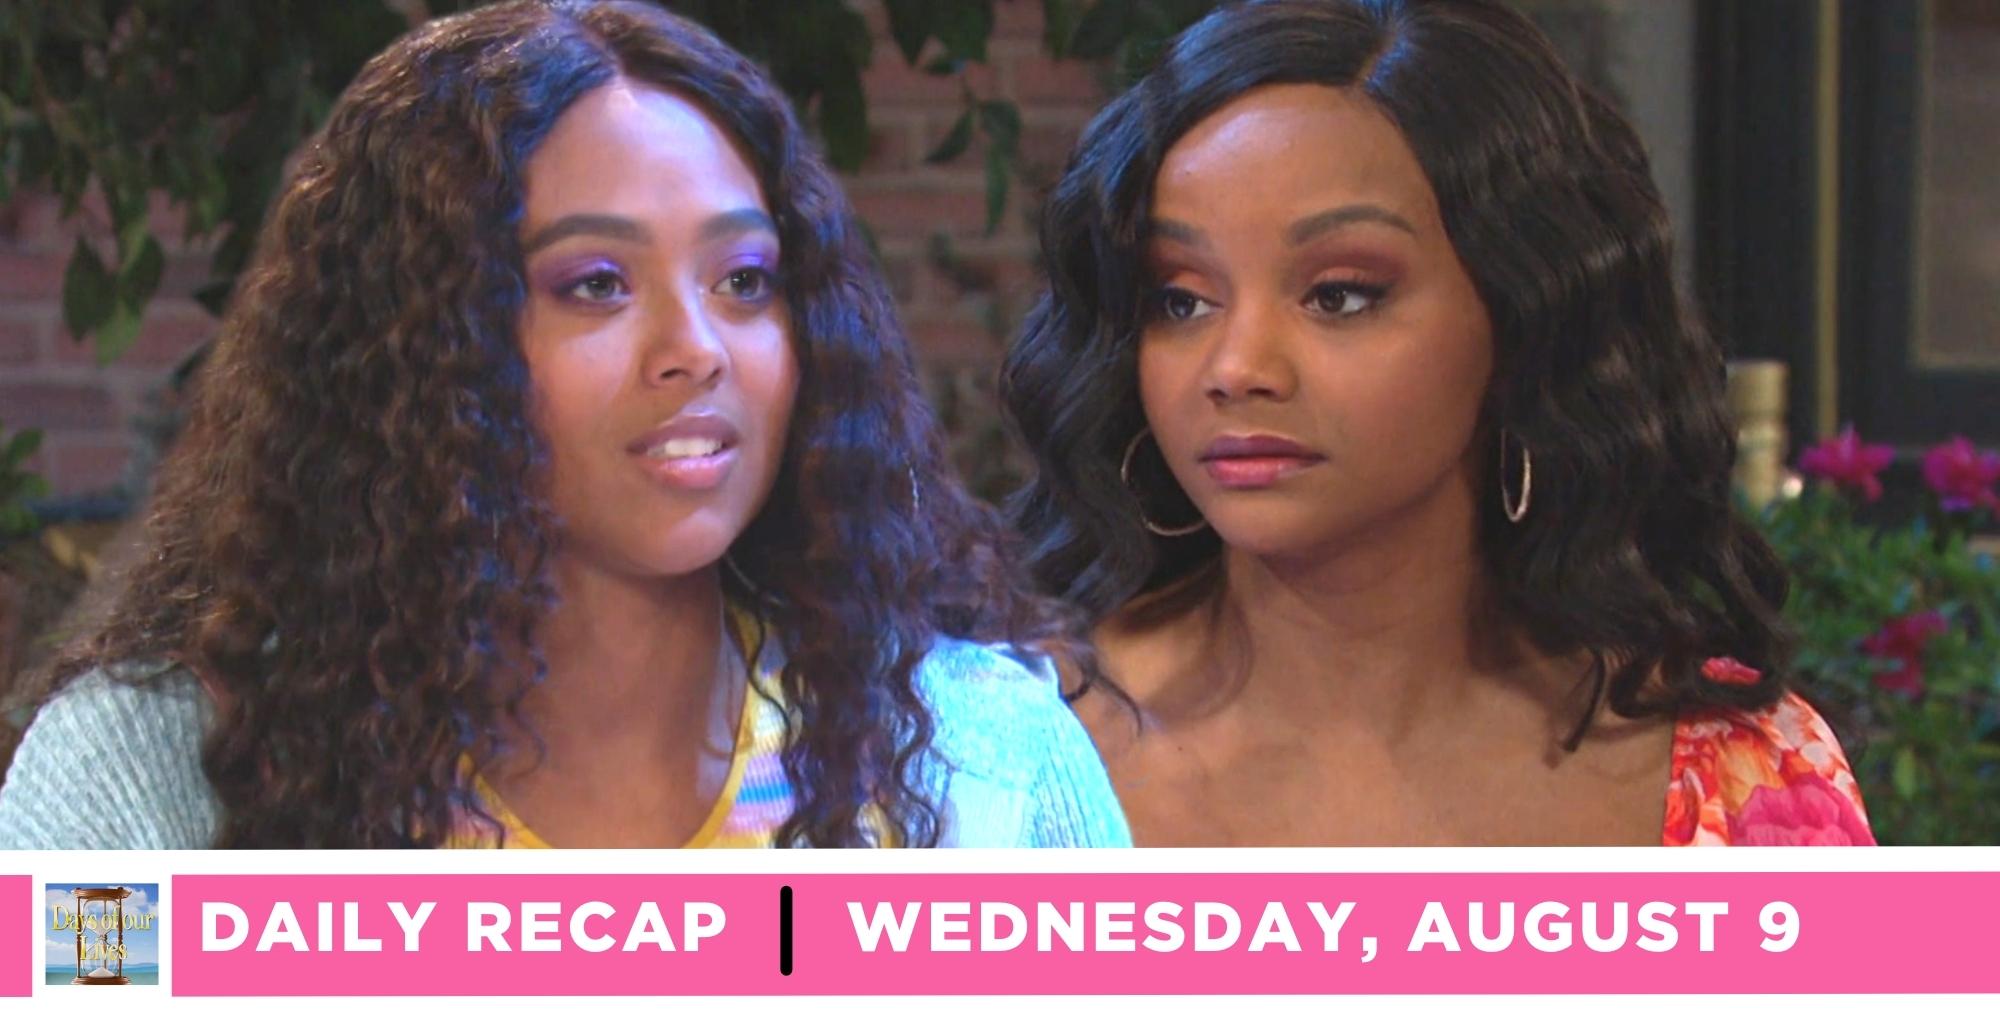 talia hunter came onto chanel dupree on the days of our lives recap for wednesday, august 9, 2023.